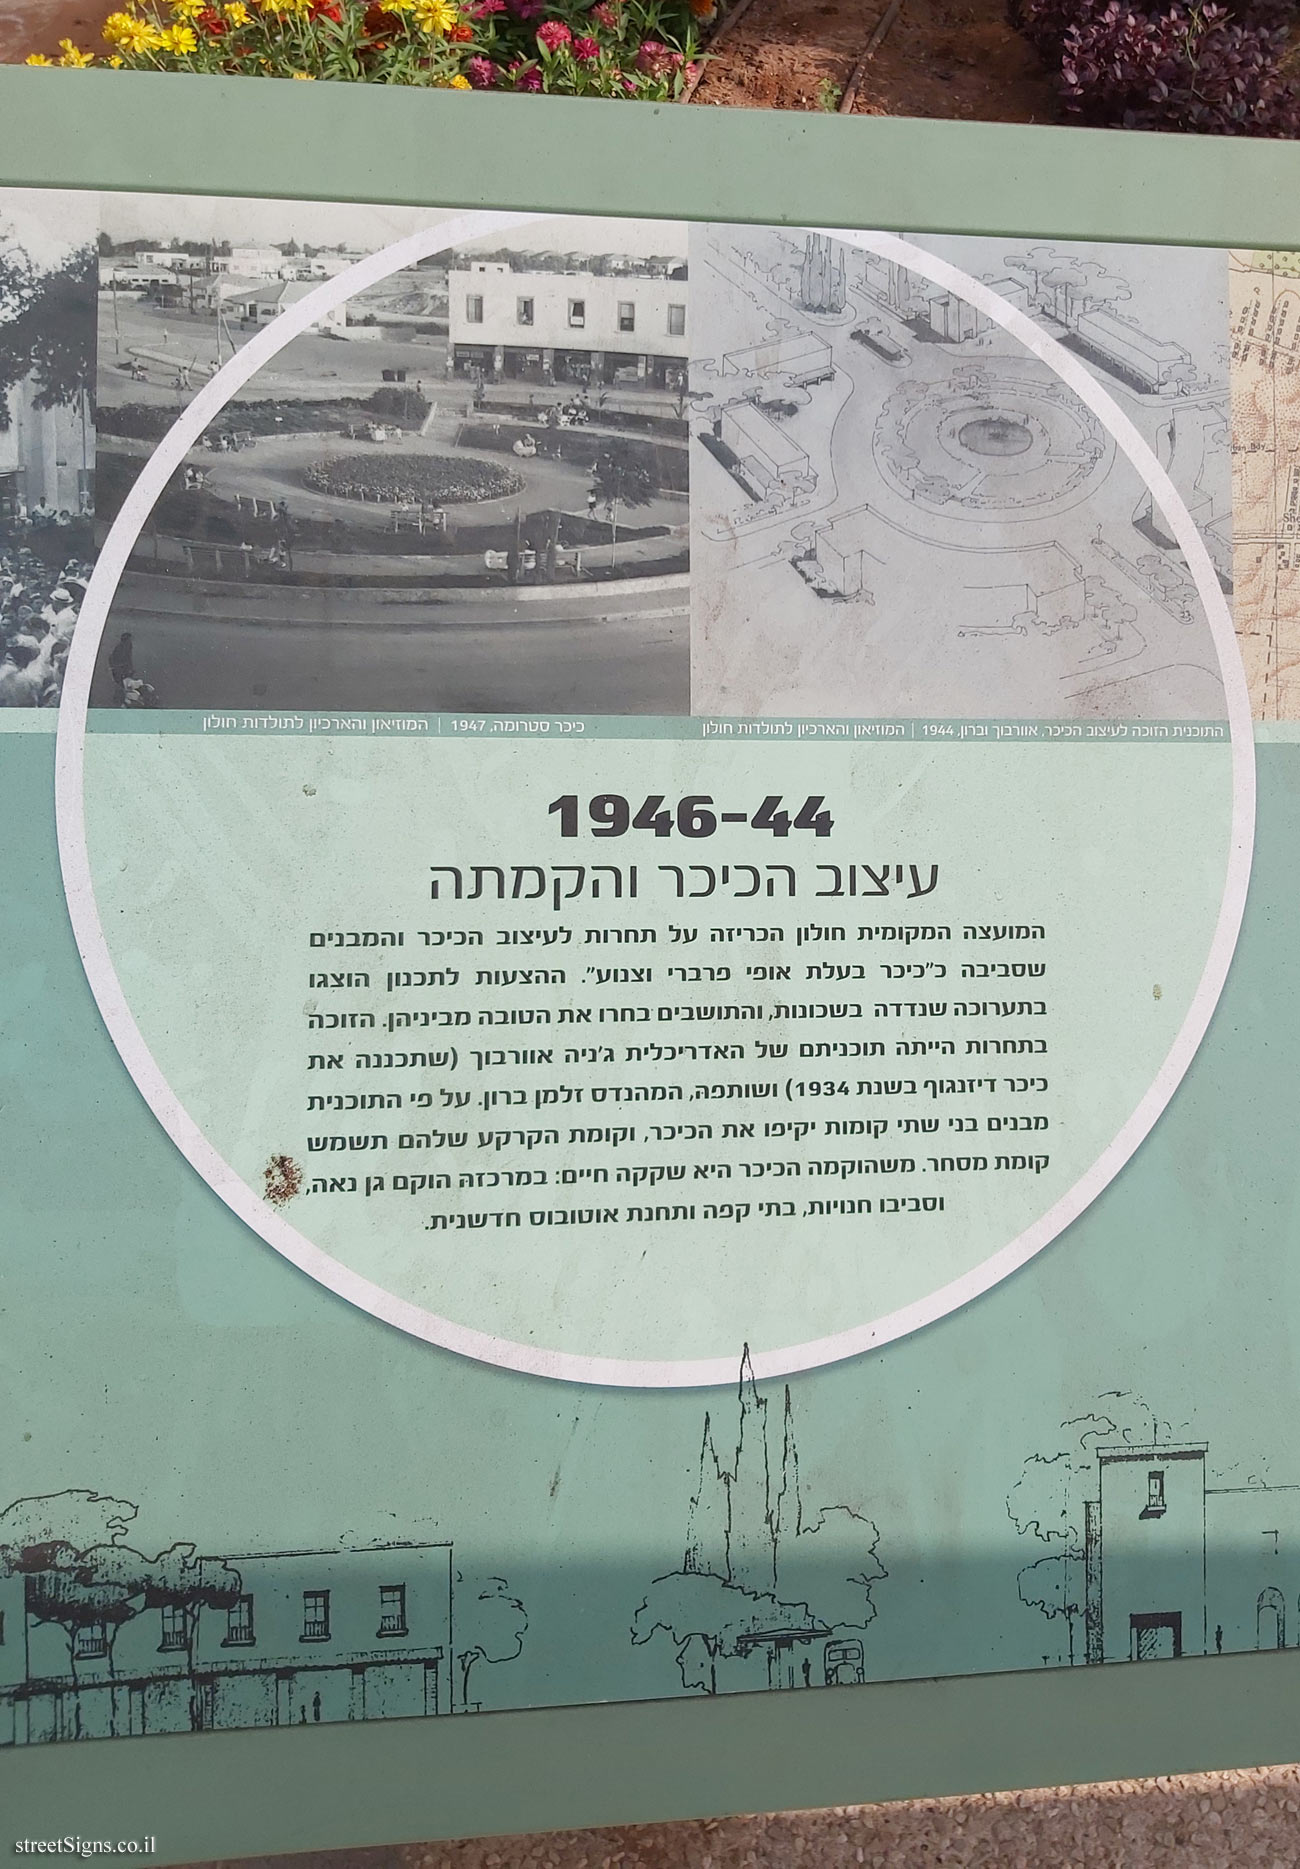 Holon - Struma Square - The story of a square - enlarged